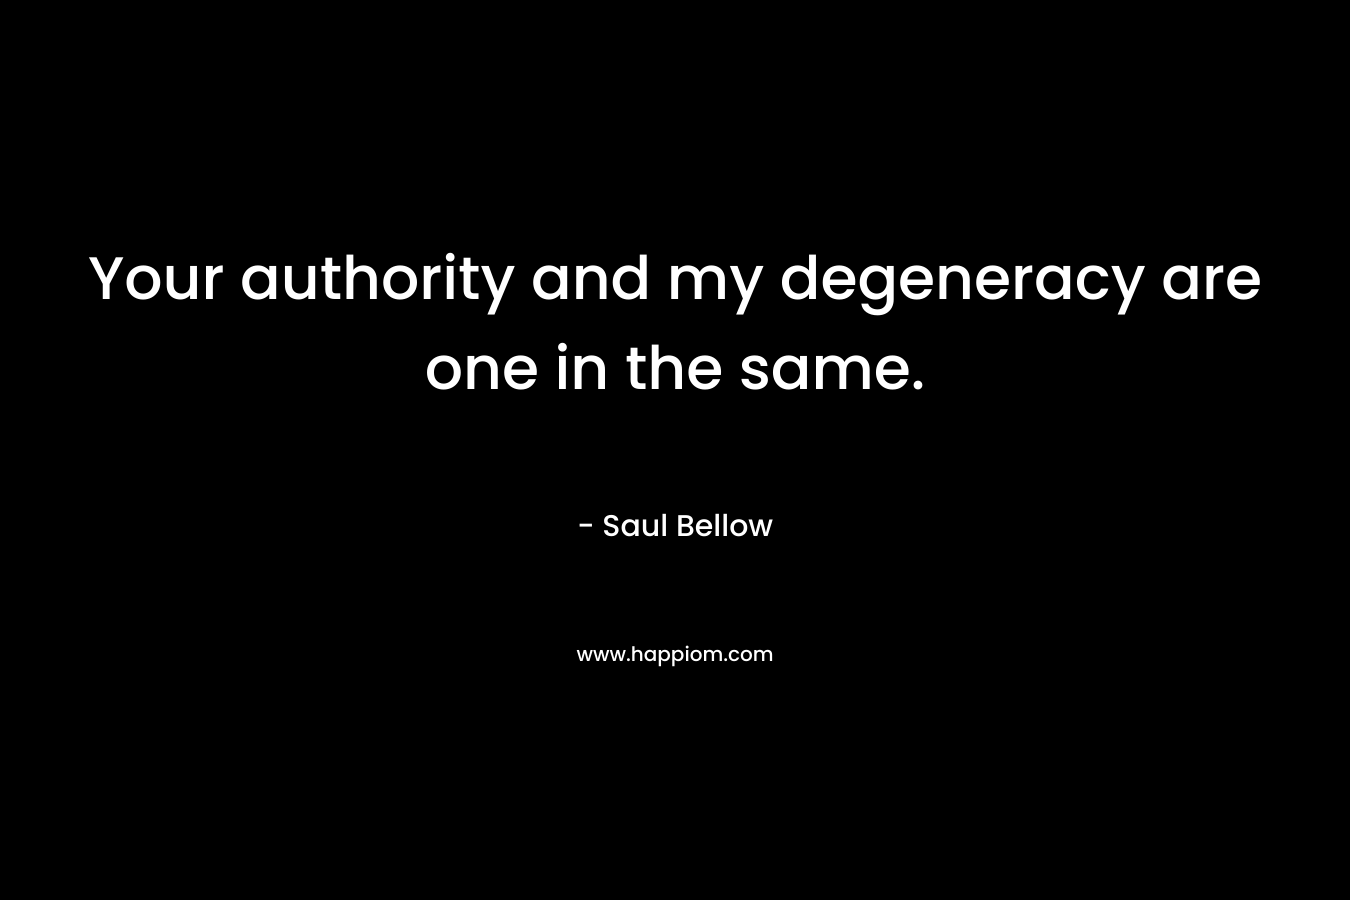 Your authority and my degeneracy are one in the same. – Saul Bellow